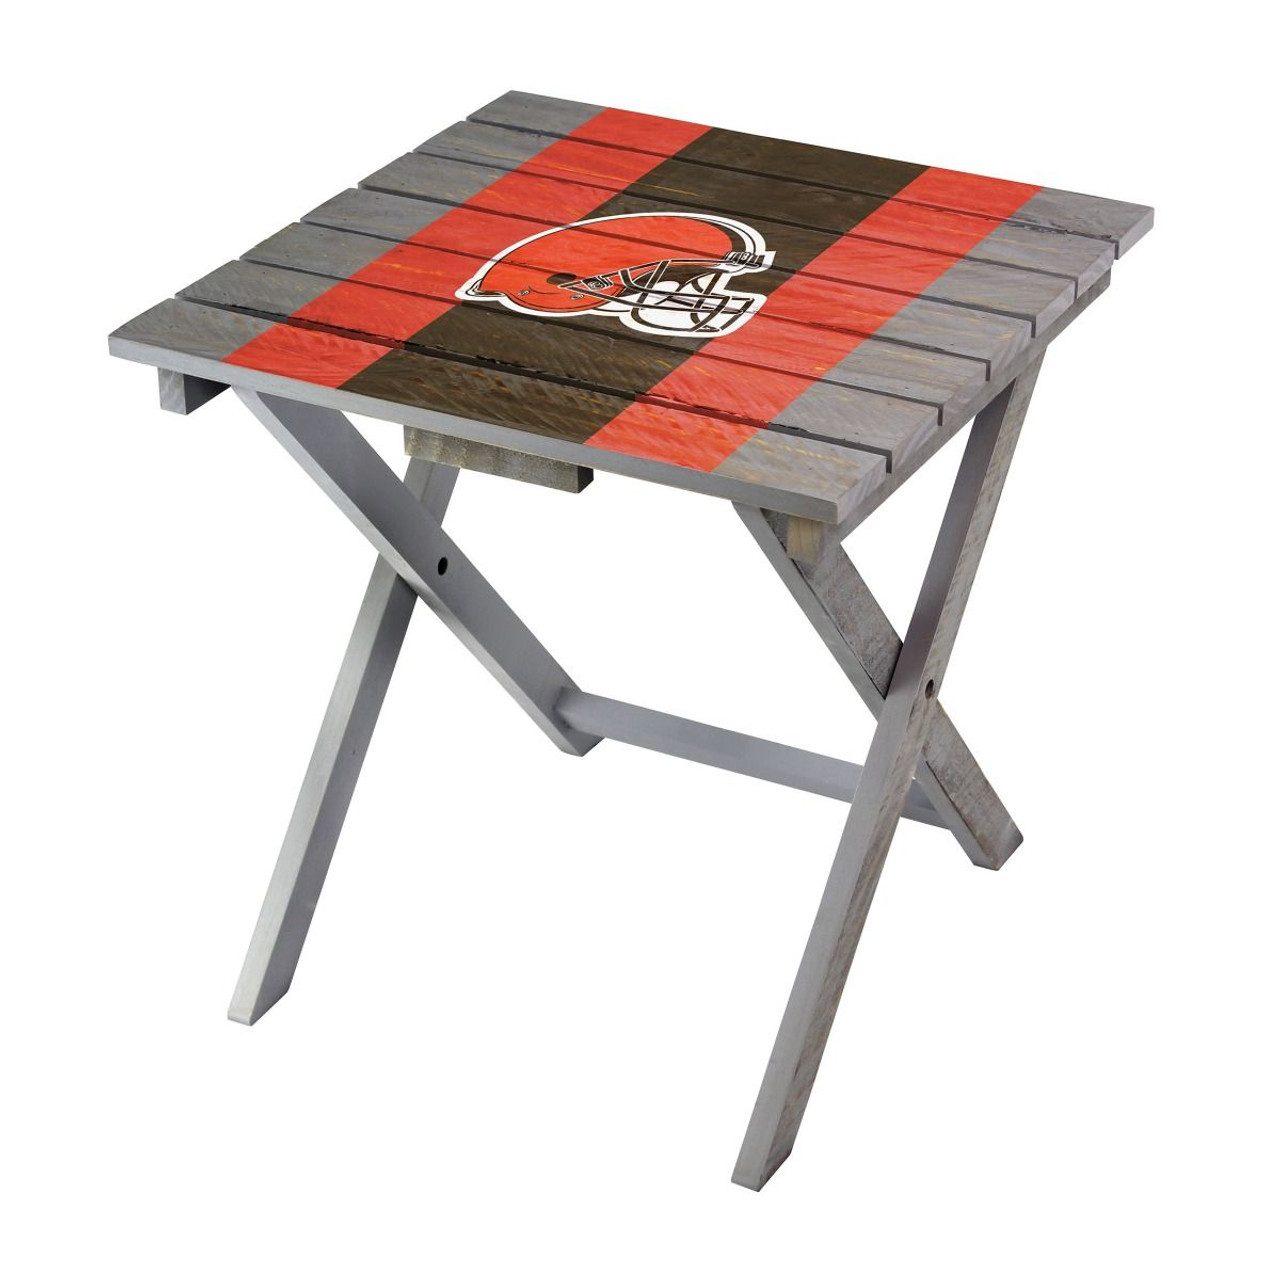  Cleveland, Browns, Folding, Adirondack, Table, 544-1020, NFL, CLE, 720801960487
